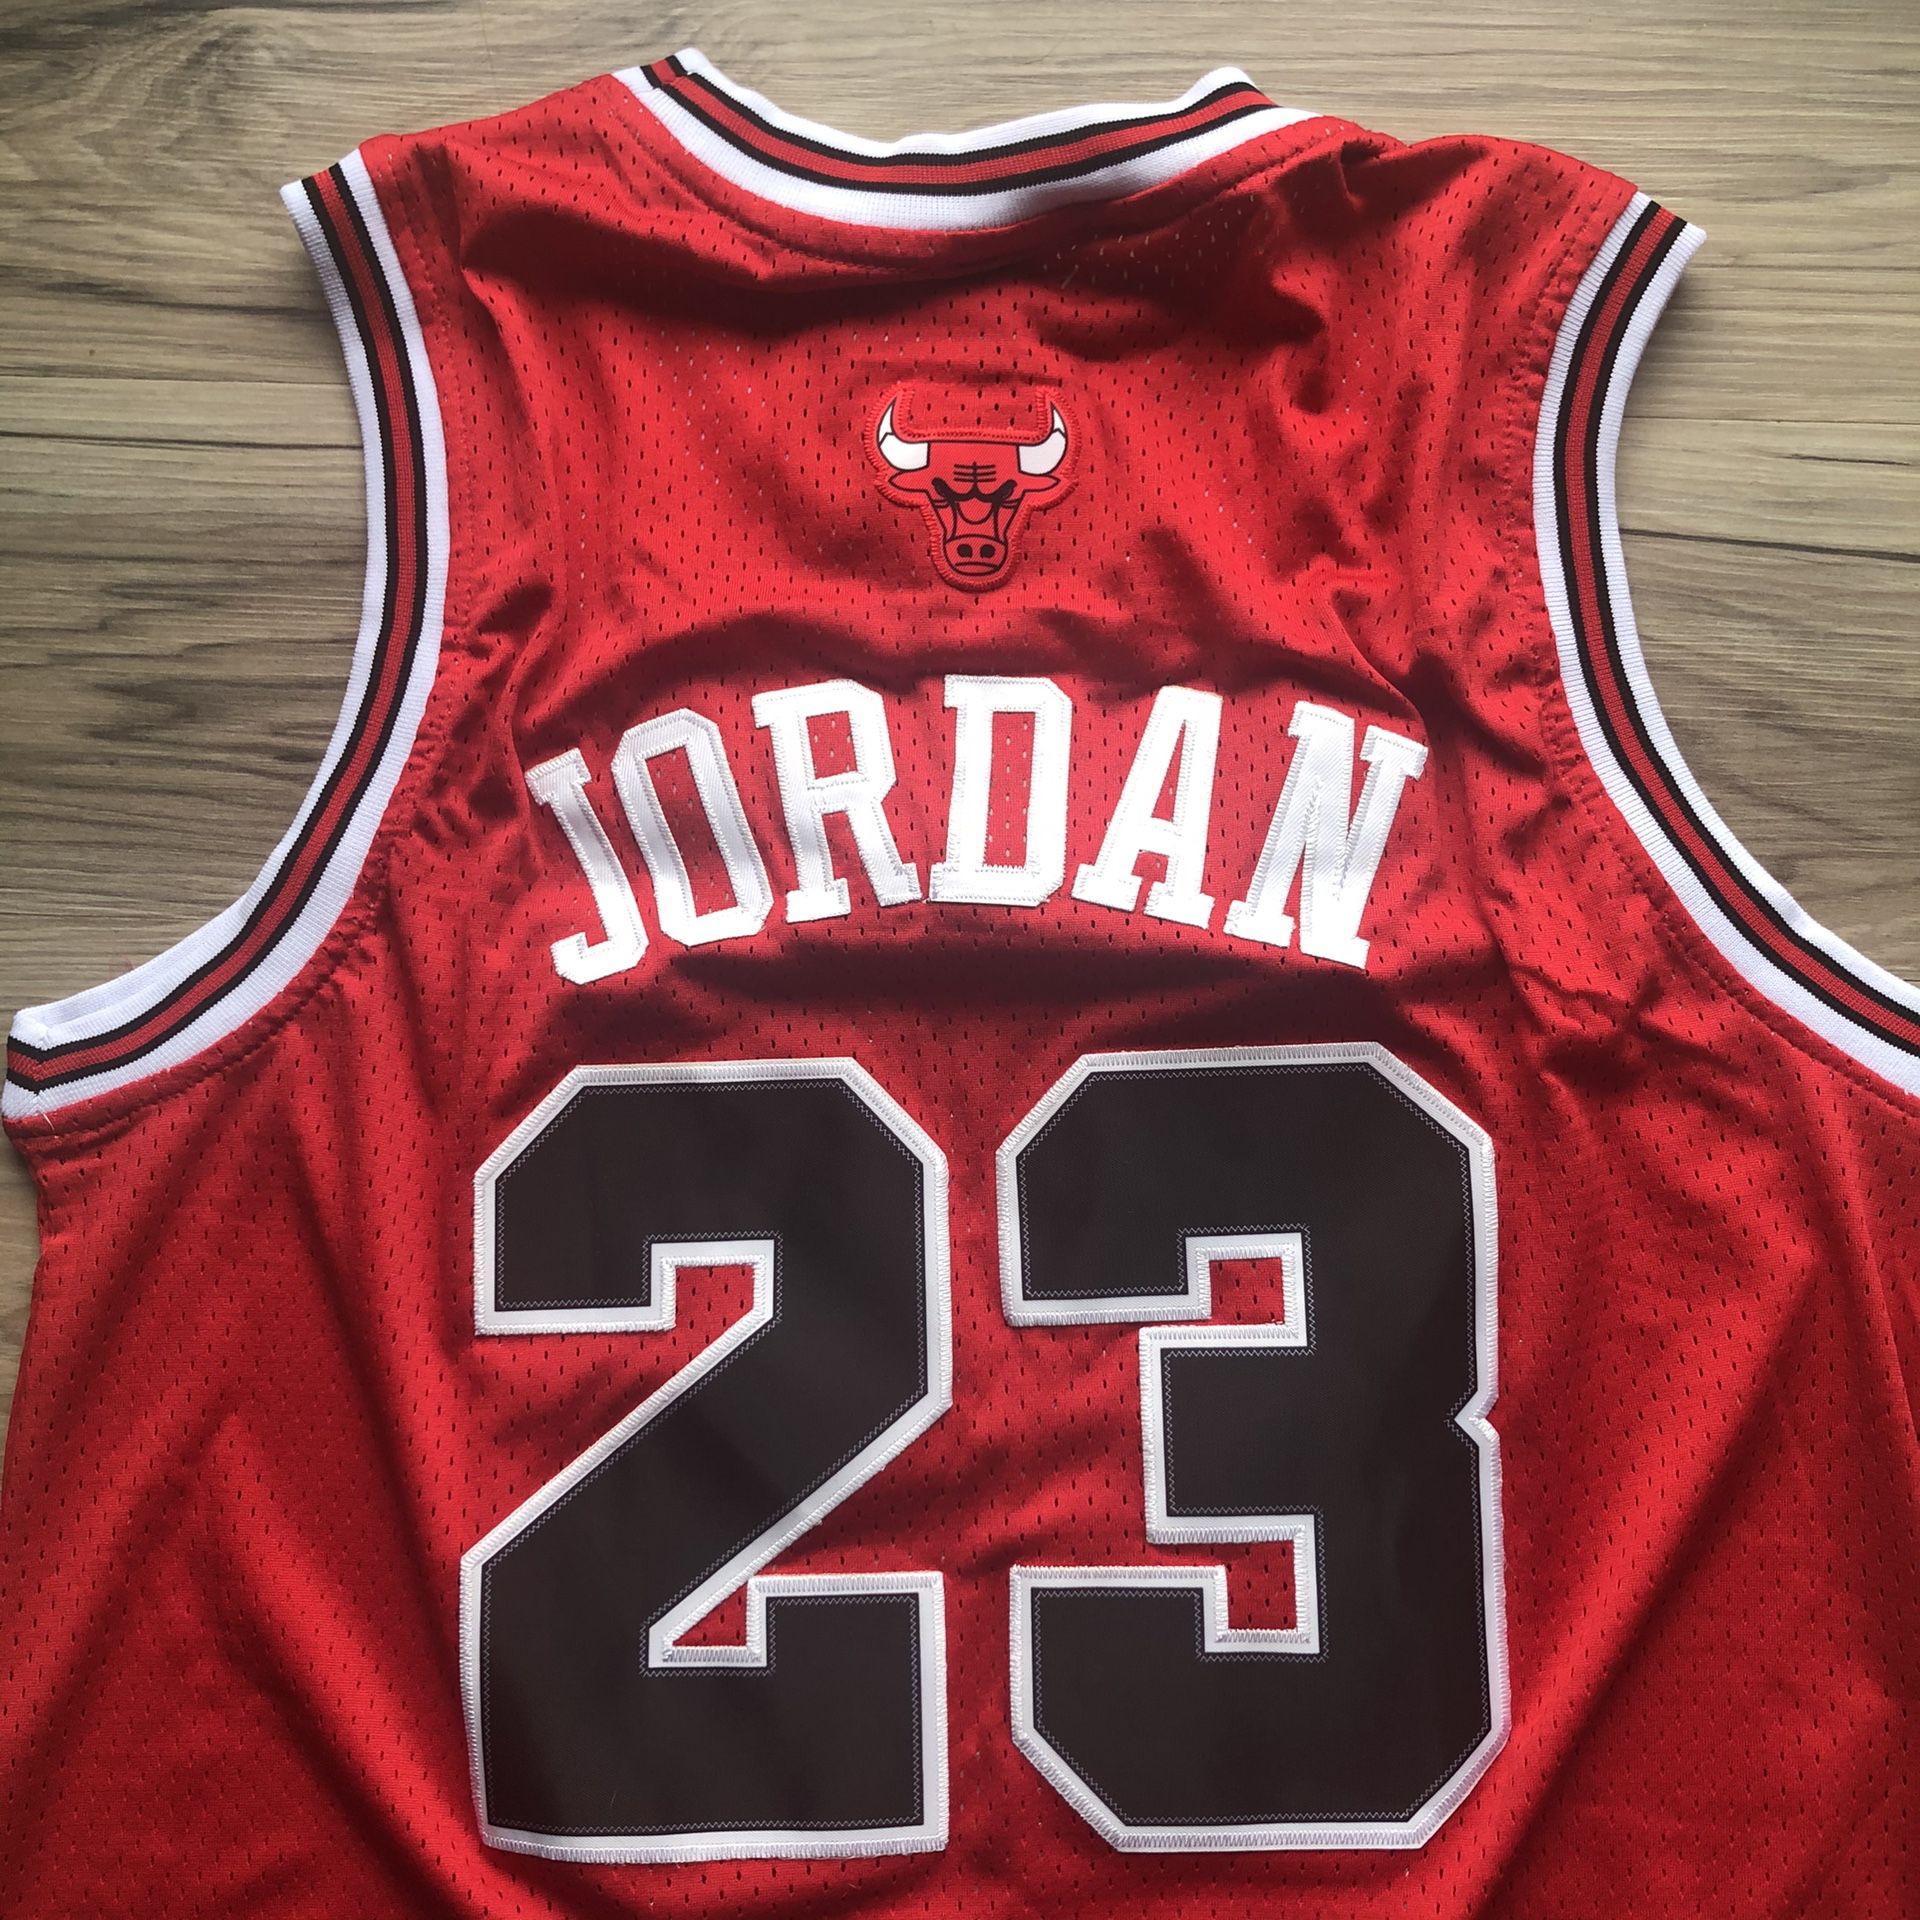 BRAND NEW! 🔥 Michael Jordan #23 Chicago Bulls NBA Nike Throwback Red Jersey + Size Large + SHIPS OUT TODAY! 🎁💨